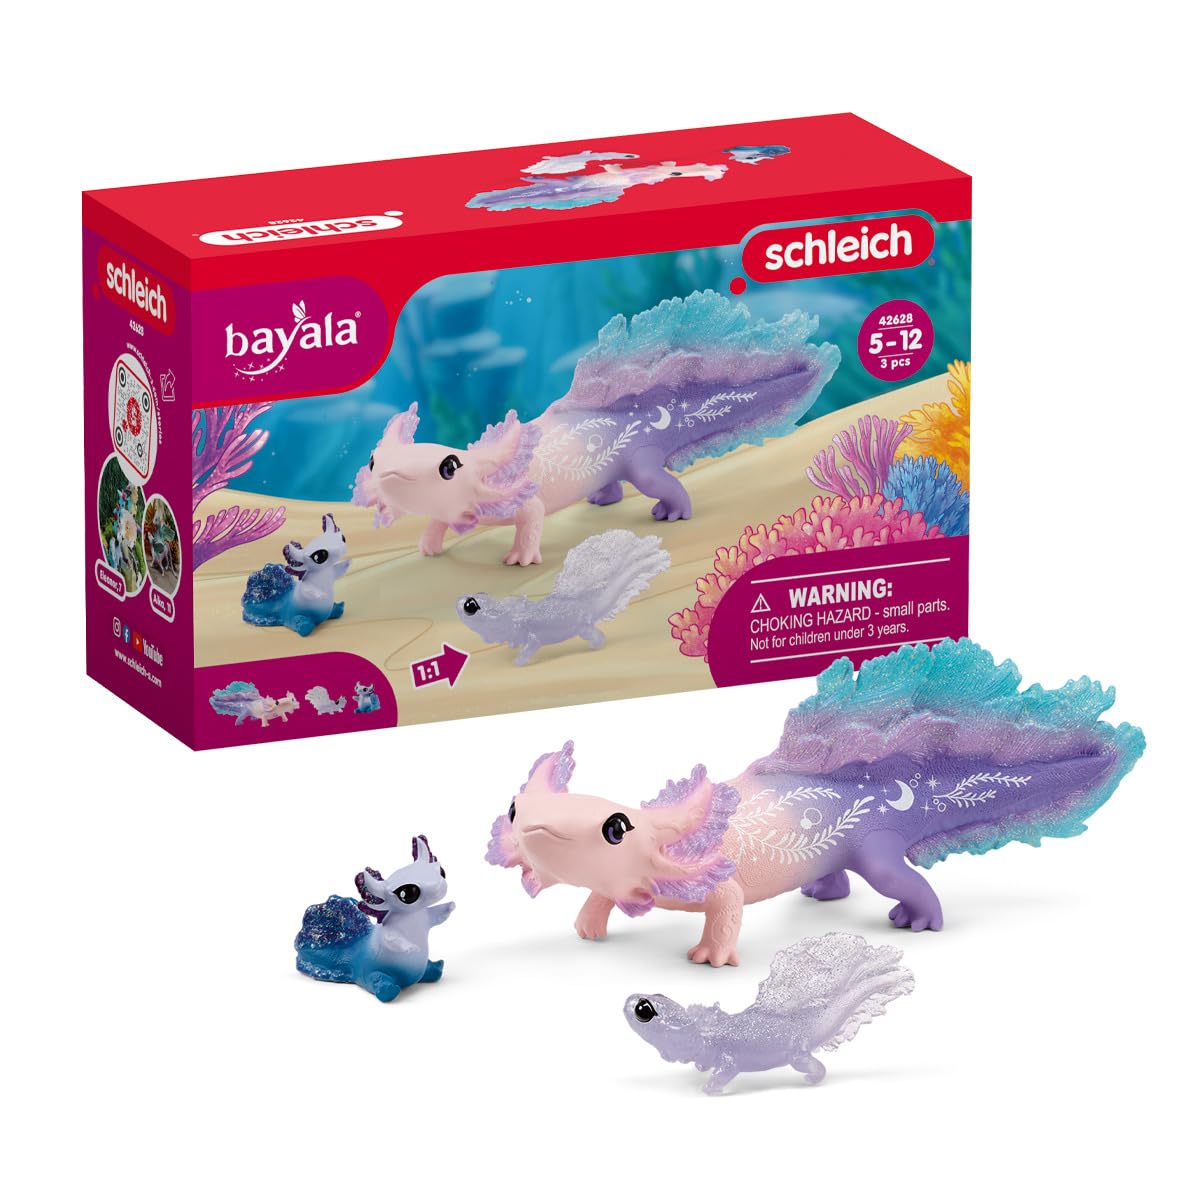 Schleich bayala, 3-Piece Set. Axolotl Salamander Toys for Girls and Boys, Axolotl Discovery Playset with Mom and Babies, Ages 5+